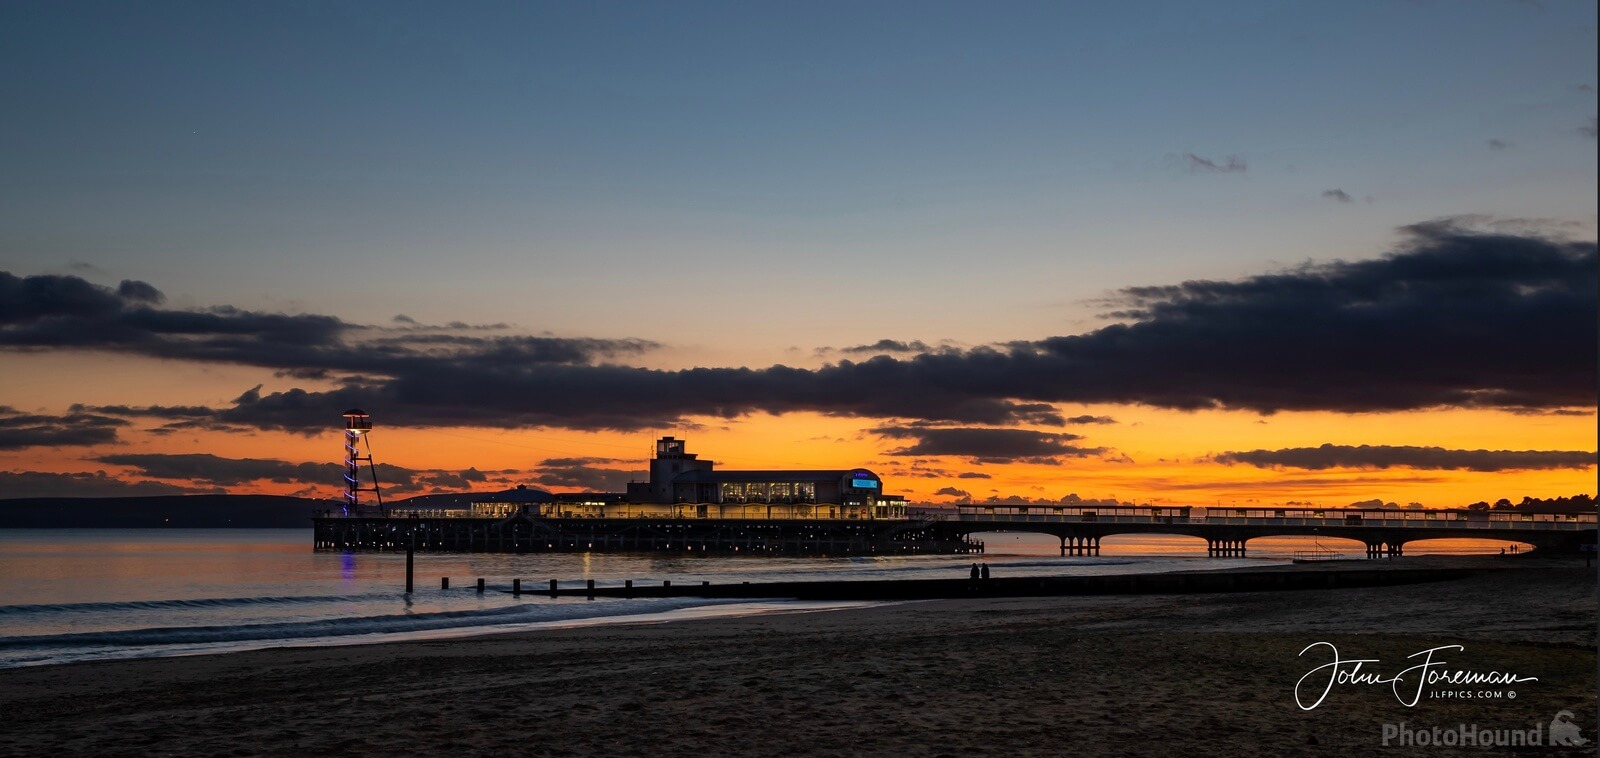 Image of Bournemouth Pier by John Foreman